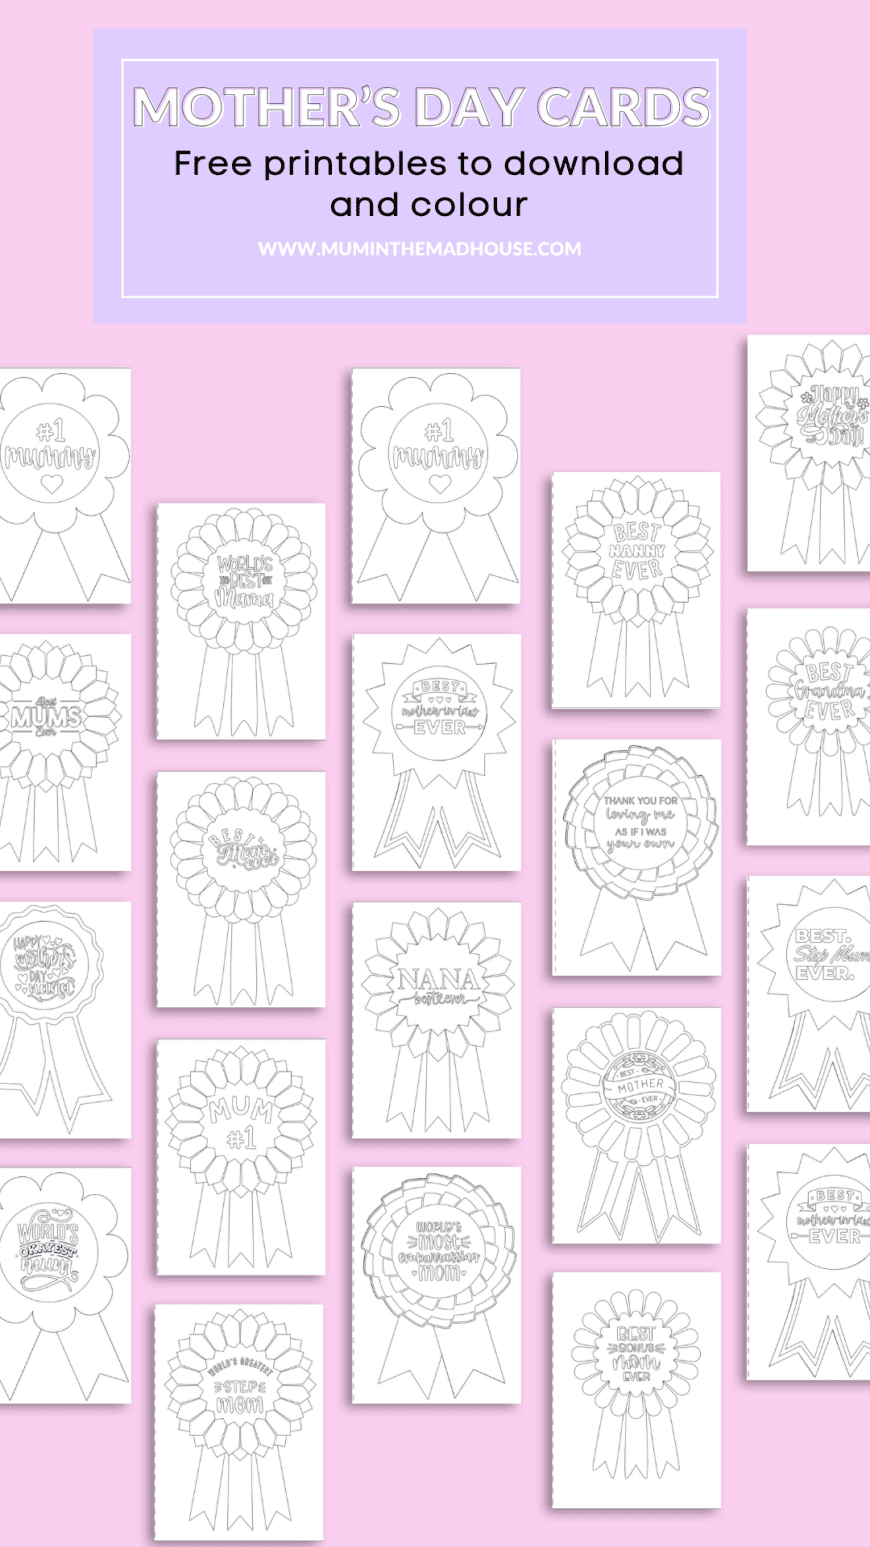 Mother's Day cards to print and colour - over 20 rosette Mother's Day cards perfect for the Mom in your life 